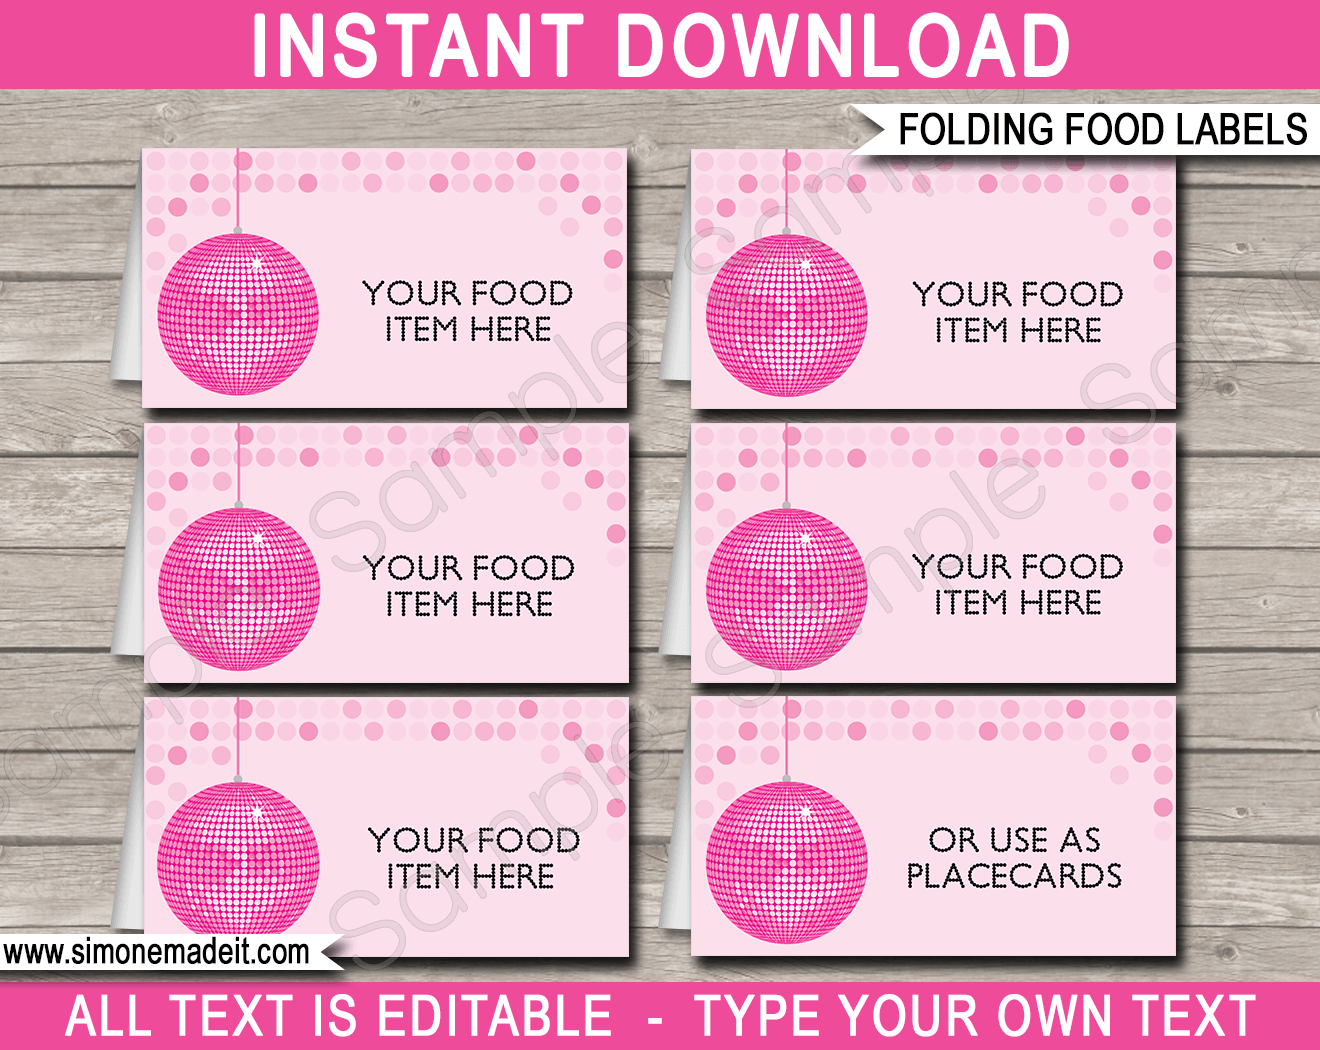 Printable Disco Party Food Labels | Food Buffet Tags | Tent Cards | Place Cards | Disco Theme Birthday Party Decorations | DIY Editable Template | Instant Download via simonemadeit.com